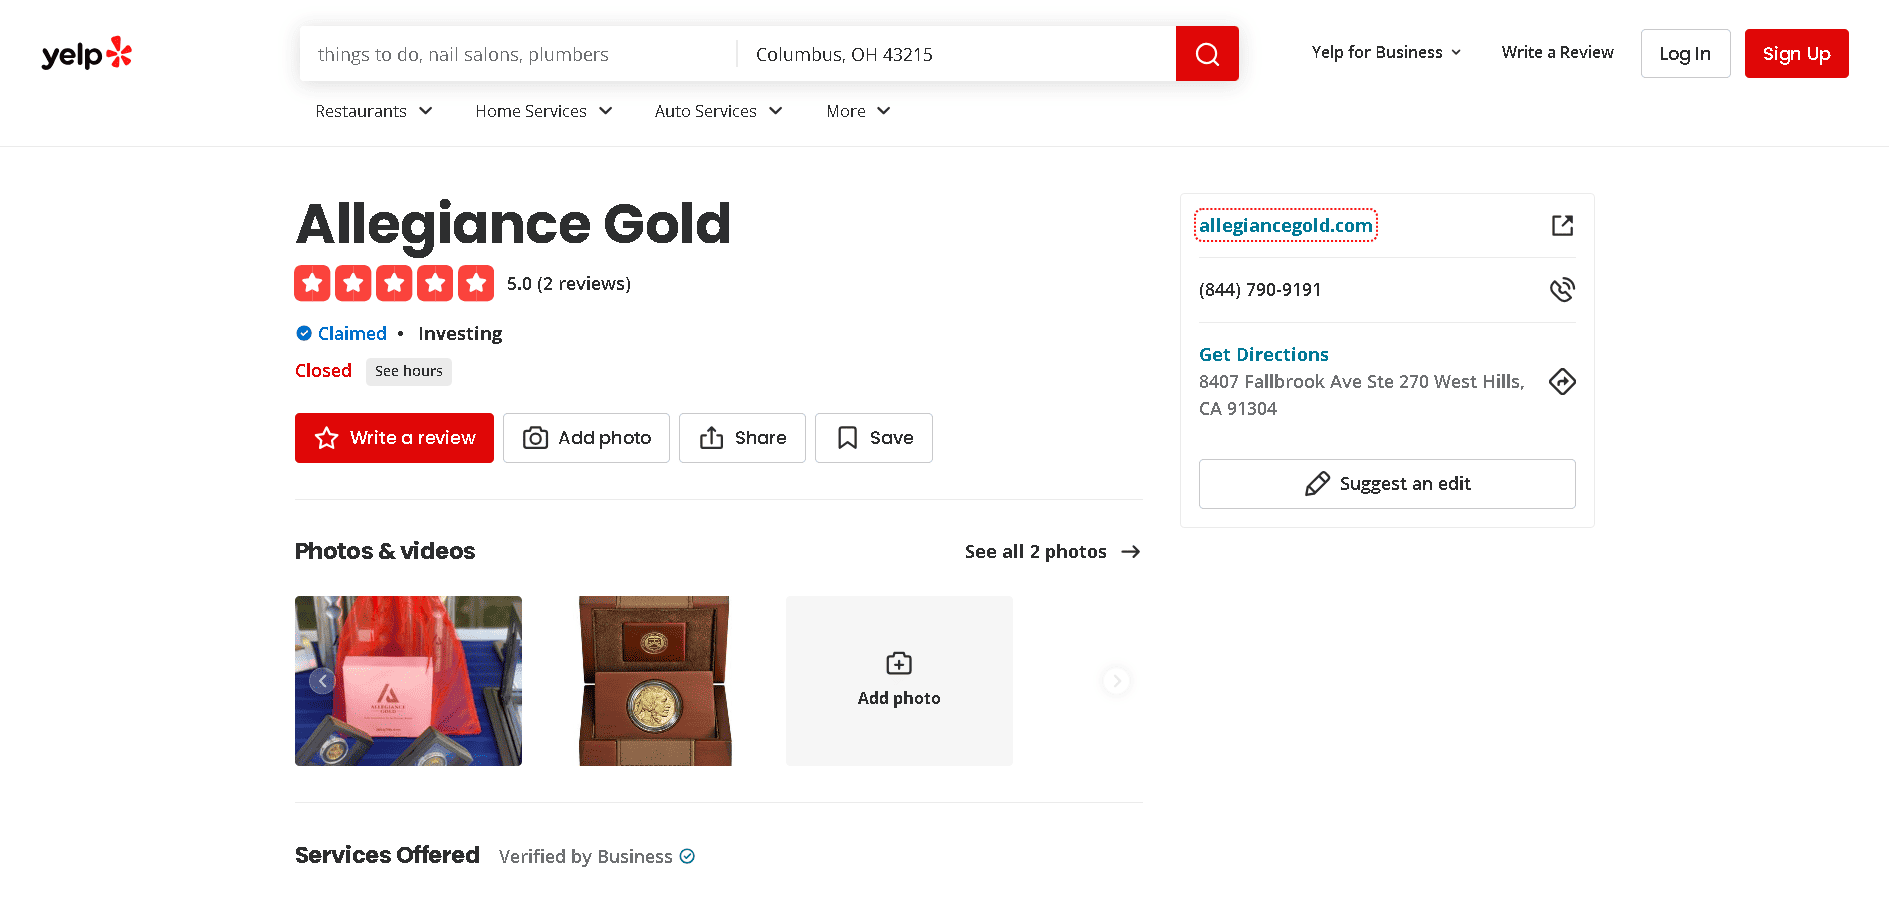 Allegiance Gold Yelp profile and positive reviews